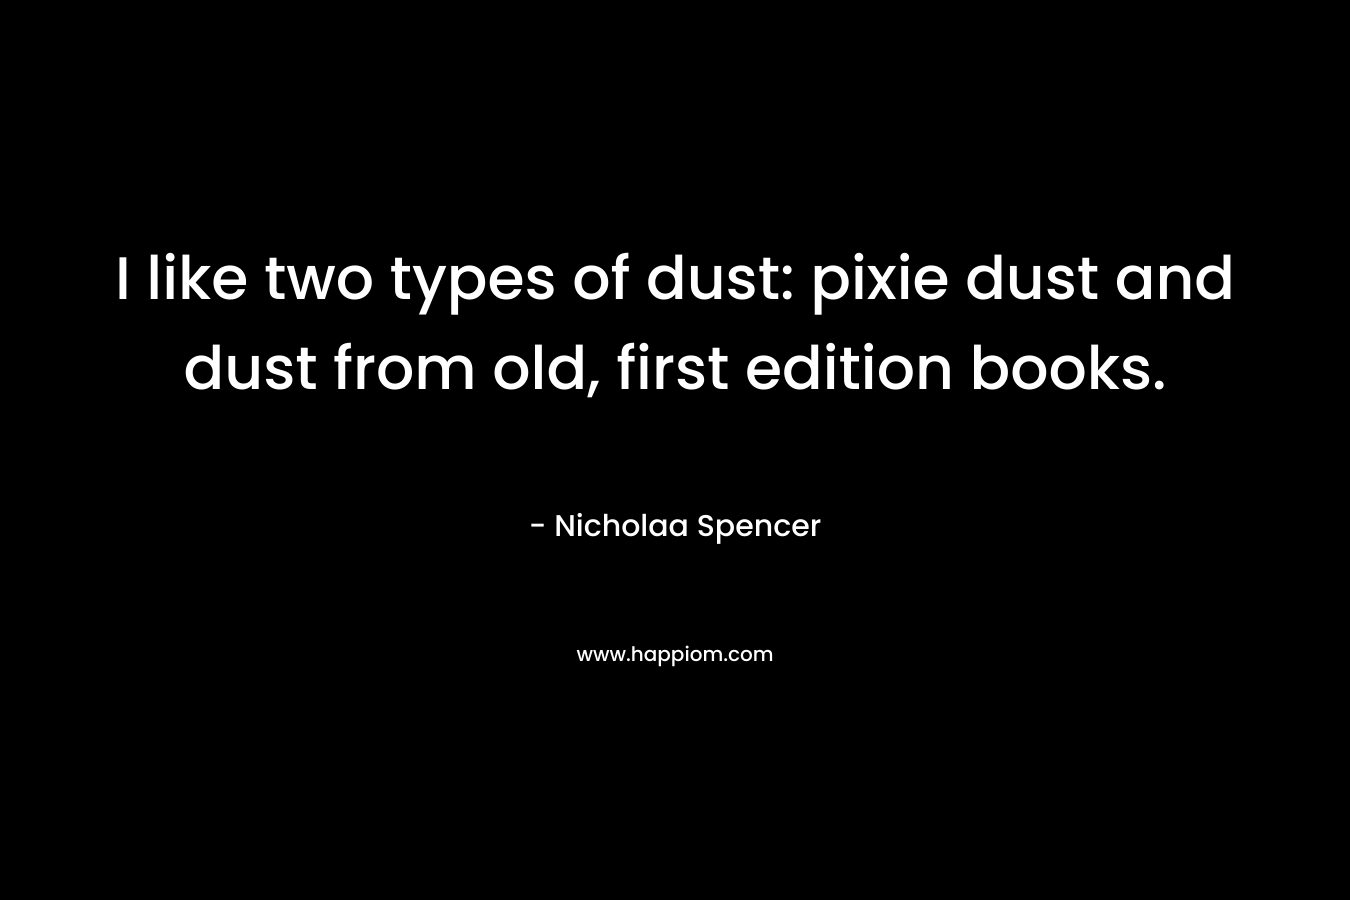 I like two types of dust: pixie dust and dust from old, first edition books. – Nicholaa Spencer